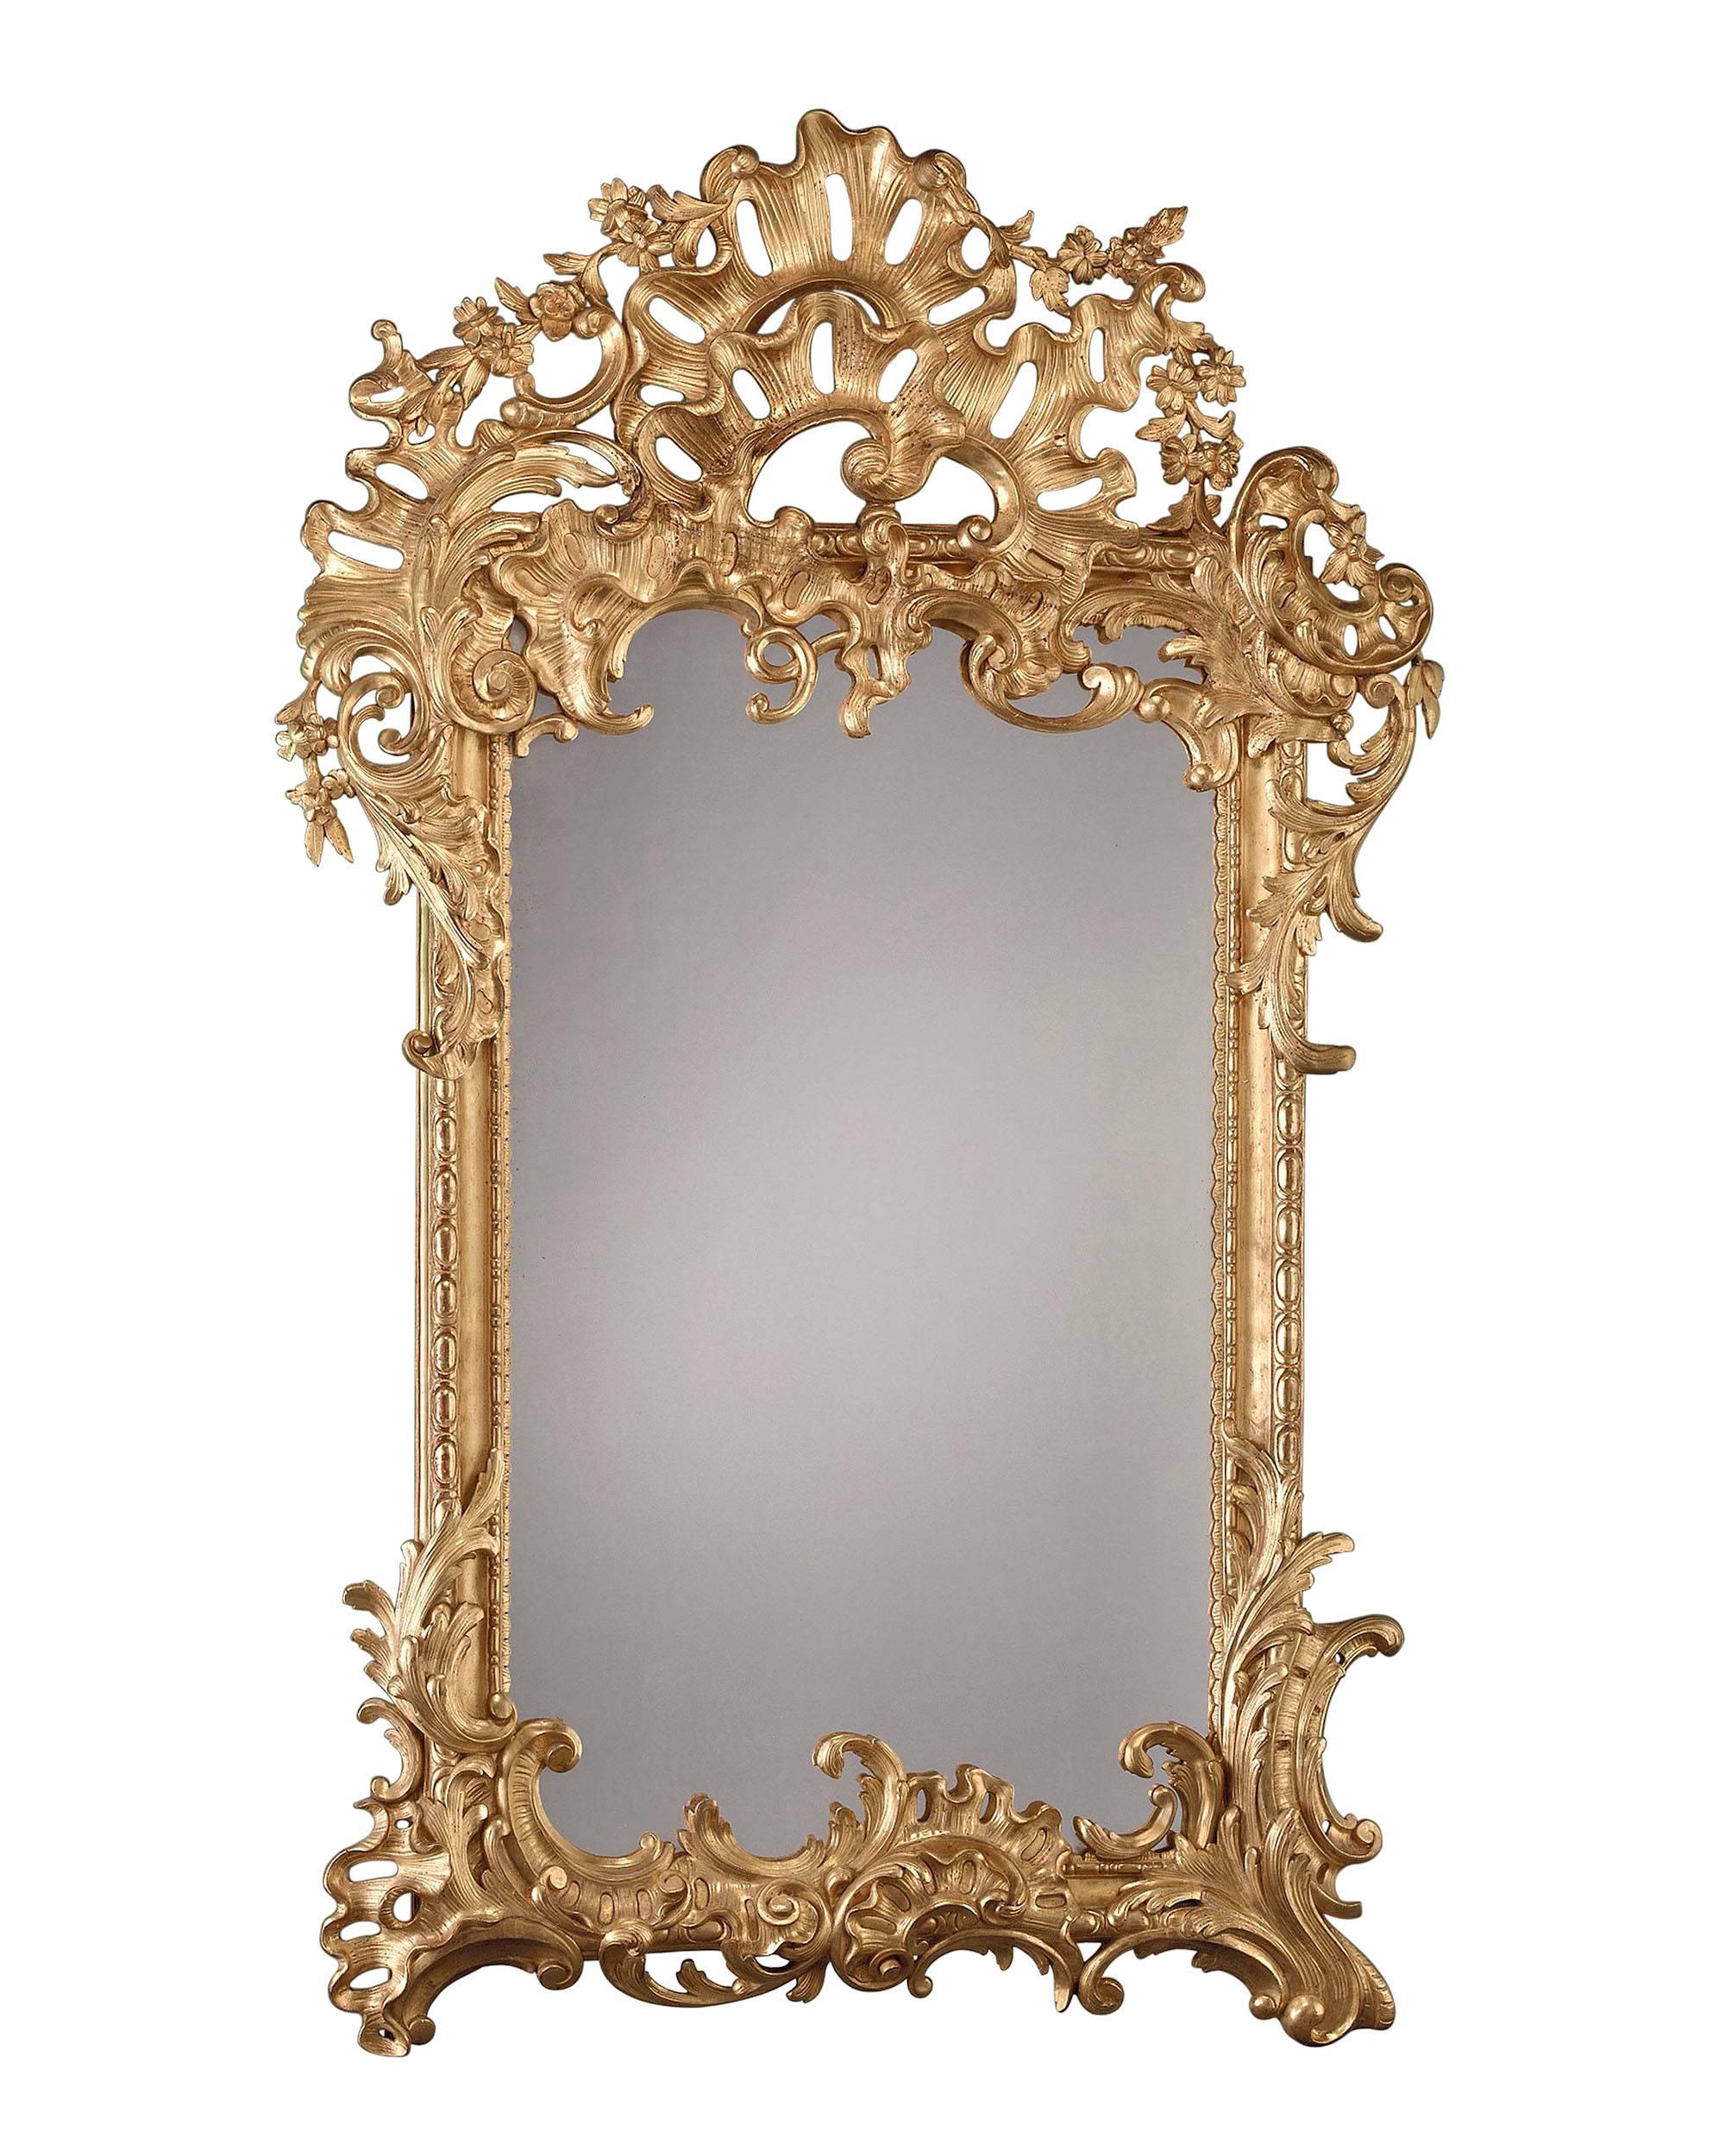 A spectacular French mirror of grand proportion expertly carved of giltwood in an attractive asymmetrical Rococo design. Excellent condition, circa 1870.